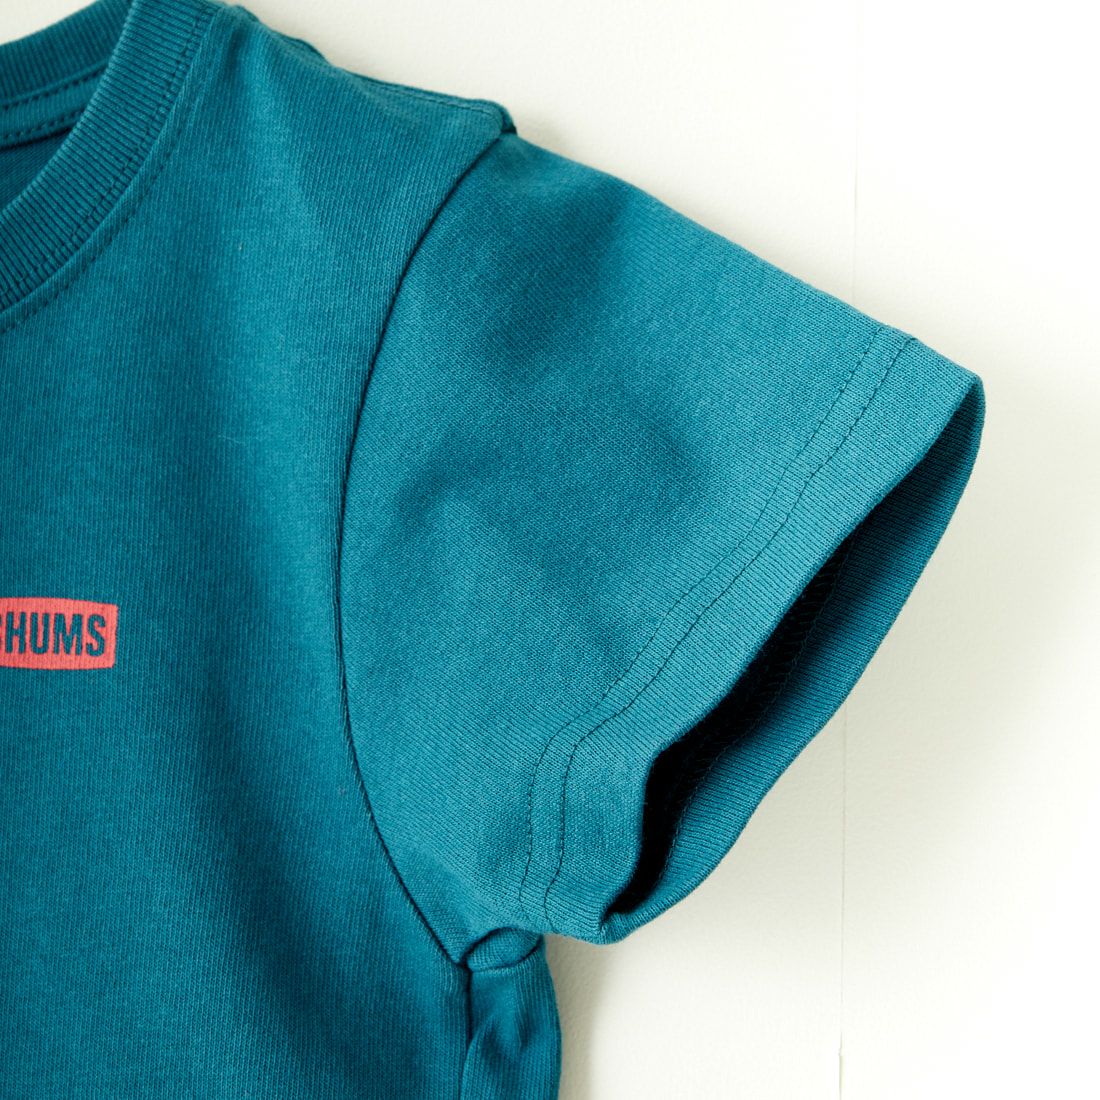 CHUMS [チャムス] キッズ ブービーロゴTシャツ [CH21-1282] T001 TEAL